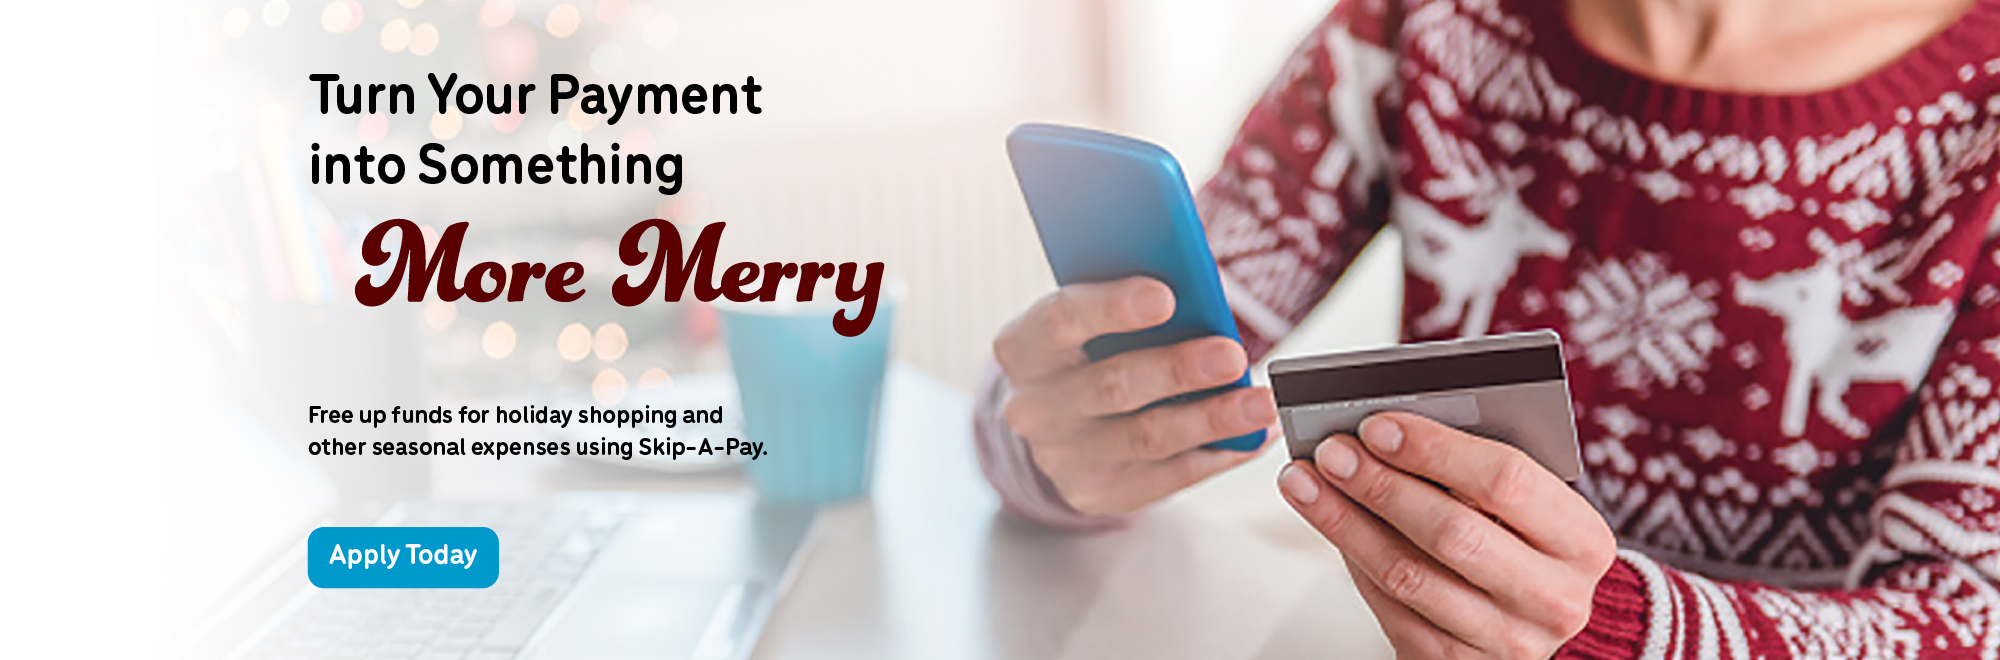 Turn your payment into something more merry. Free up funds for holiday shopping and other seasonal expenses using Skip a Pay. Apply today!